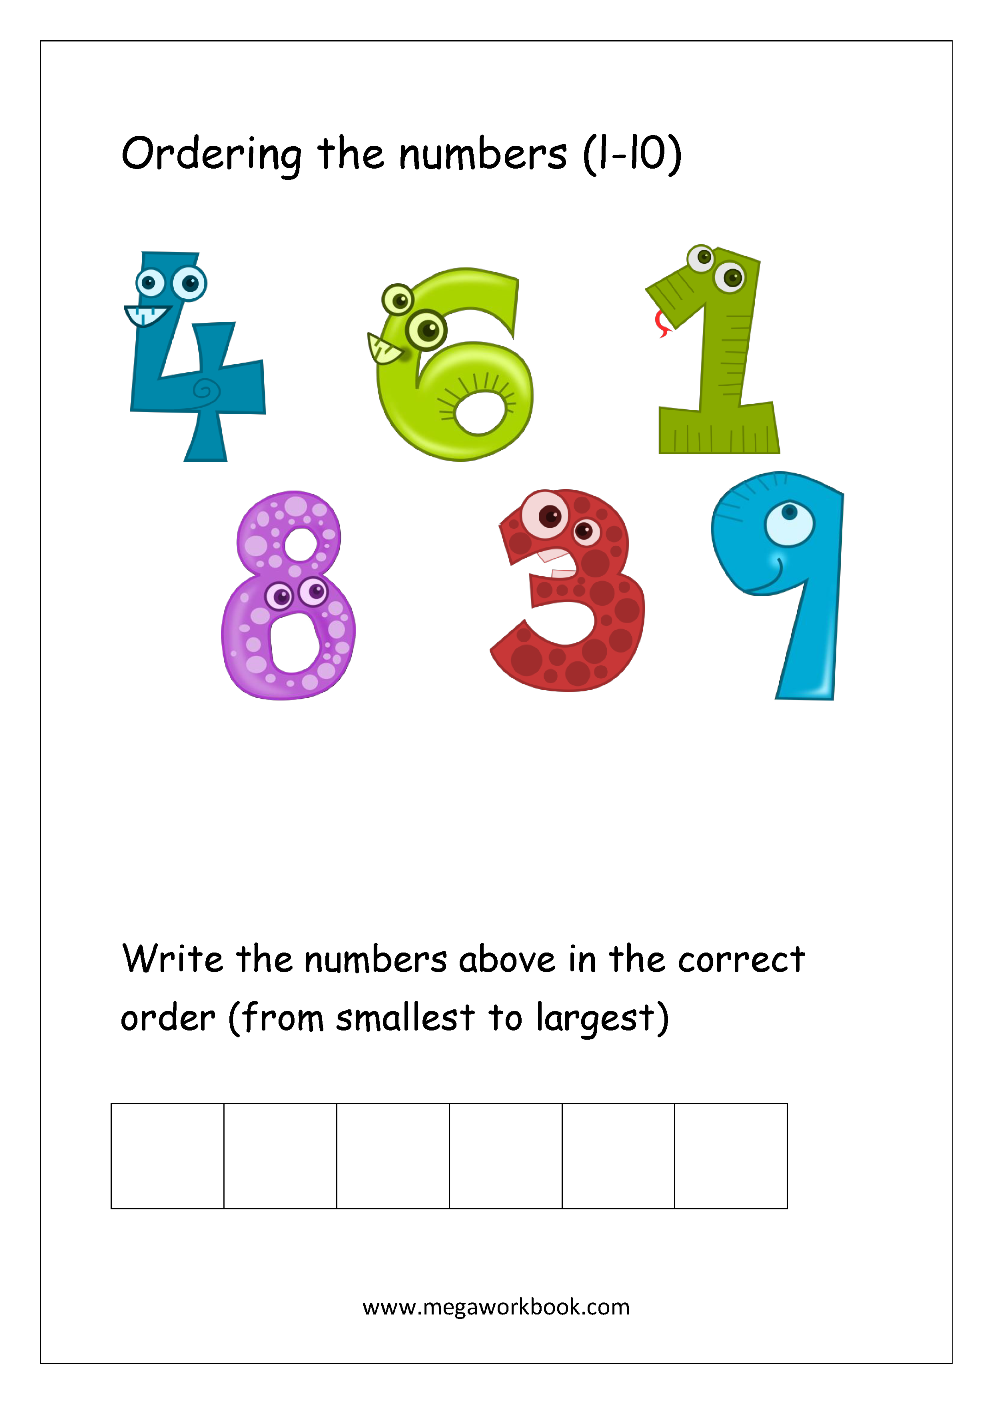 ordering-numbers-worksheets-missing-numbers-what-comes-before-and